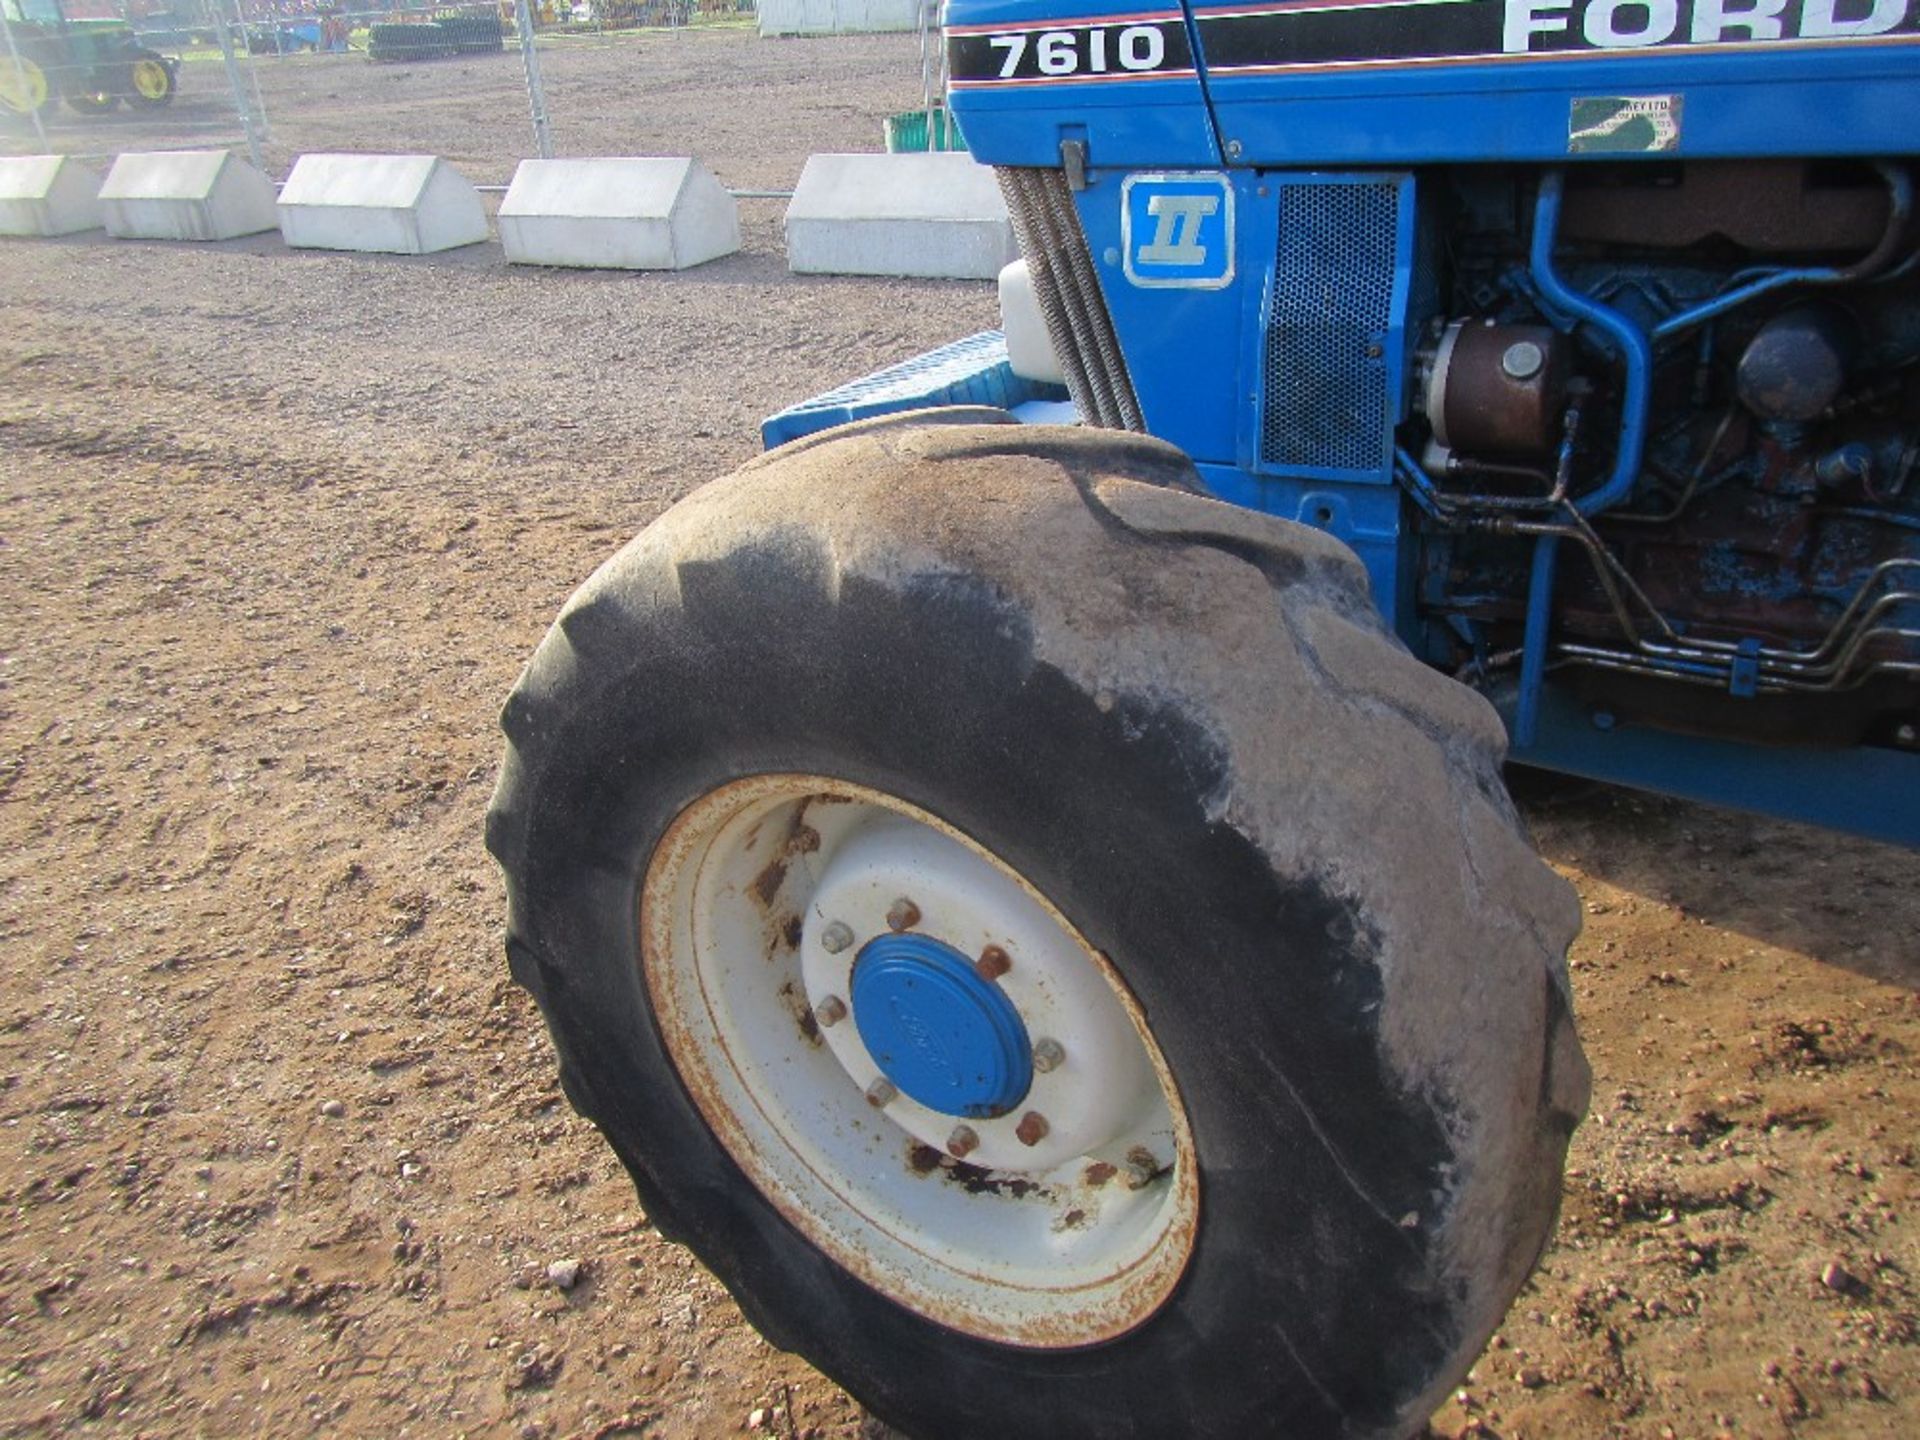 Ford 7610 4wd Tractor. Front Weights, 16.9x38 Tyres Reg No F189 OBW Ser No BB99378 - Image 12 of 18